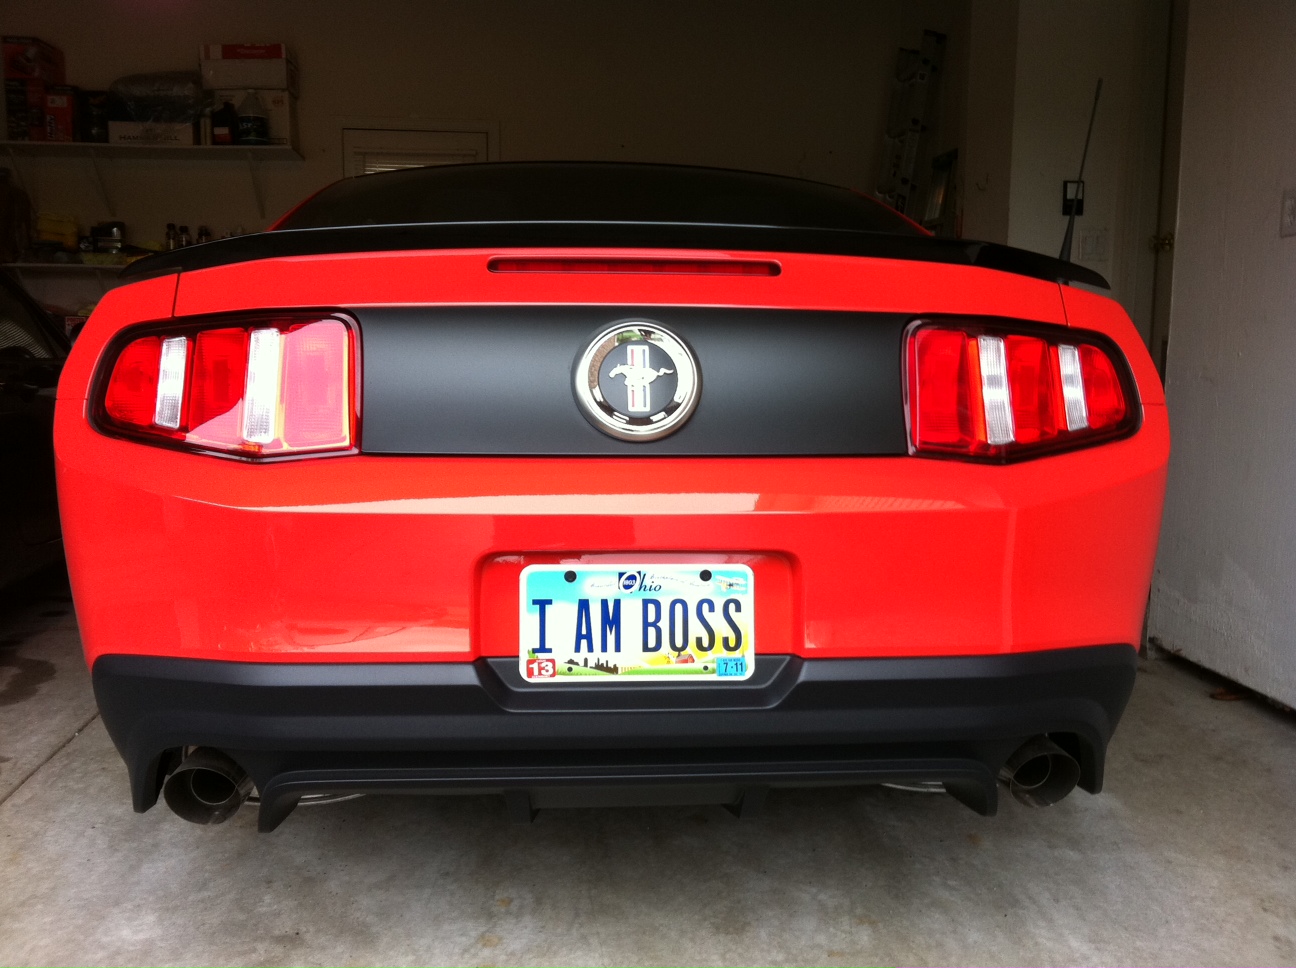 personalized-license-plates-for-your-boss-the-mustang-source-ford-mustang-forums